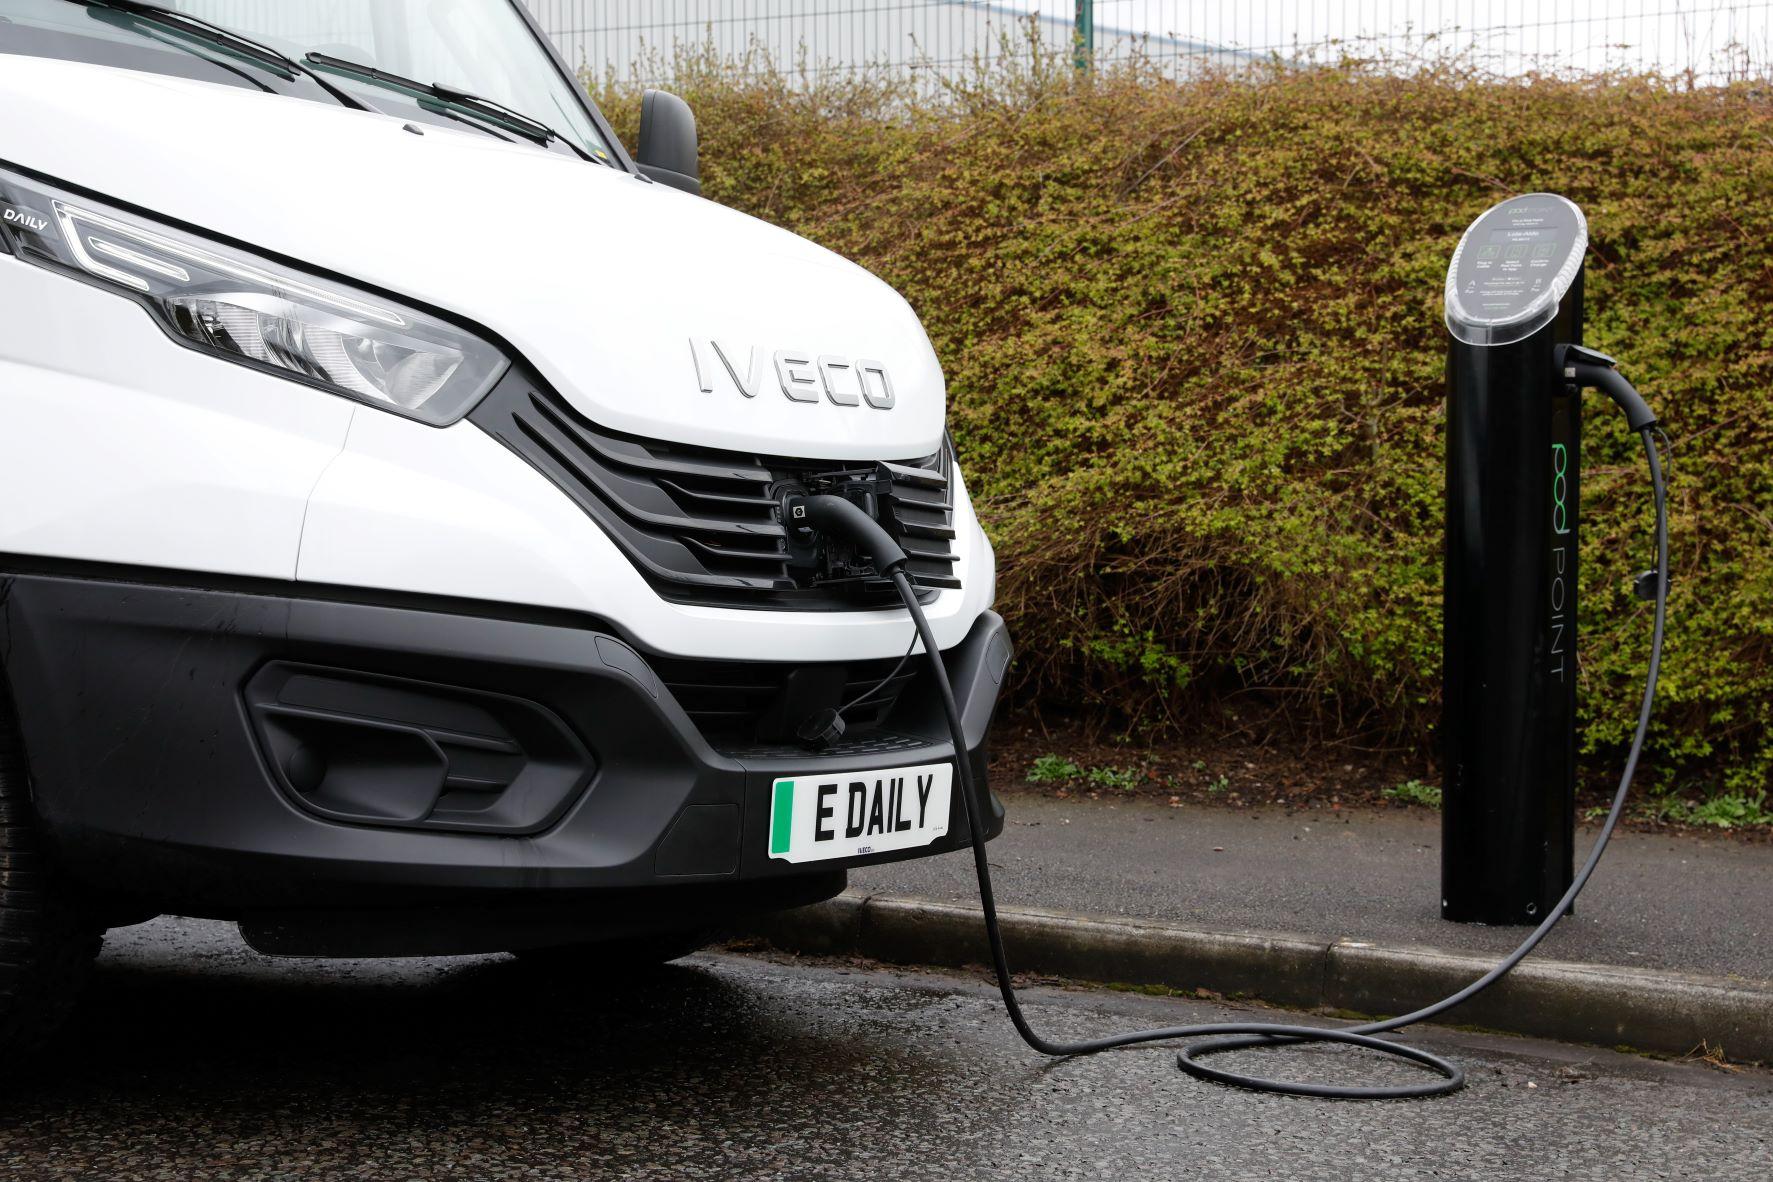 IVECO e Daily Pod Point Charging